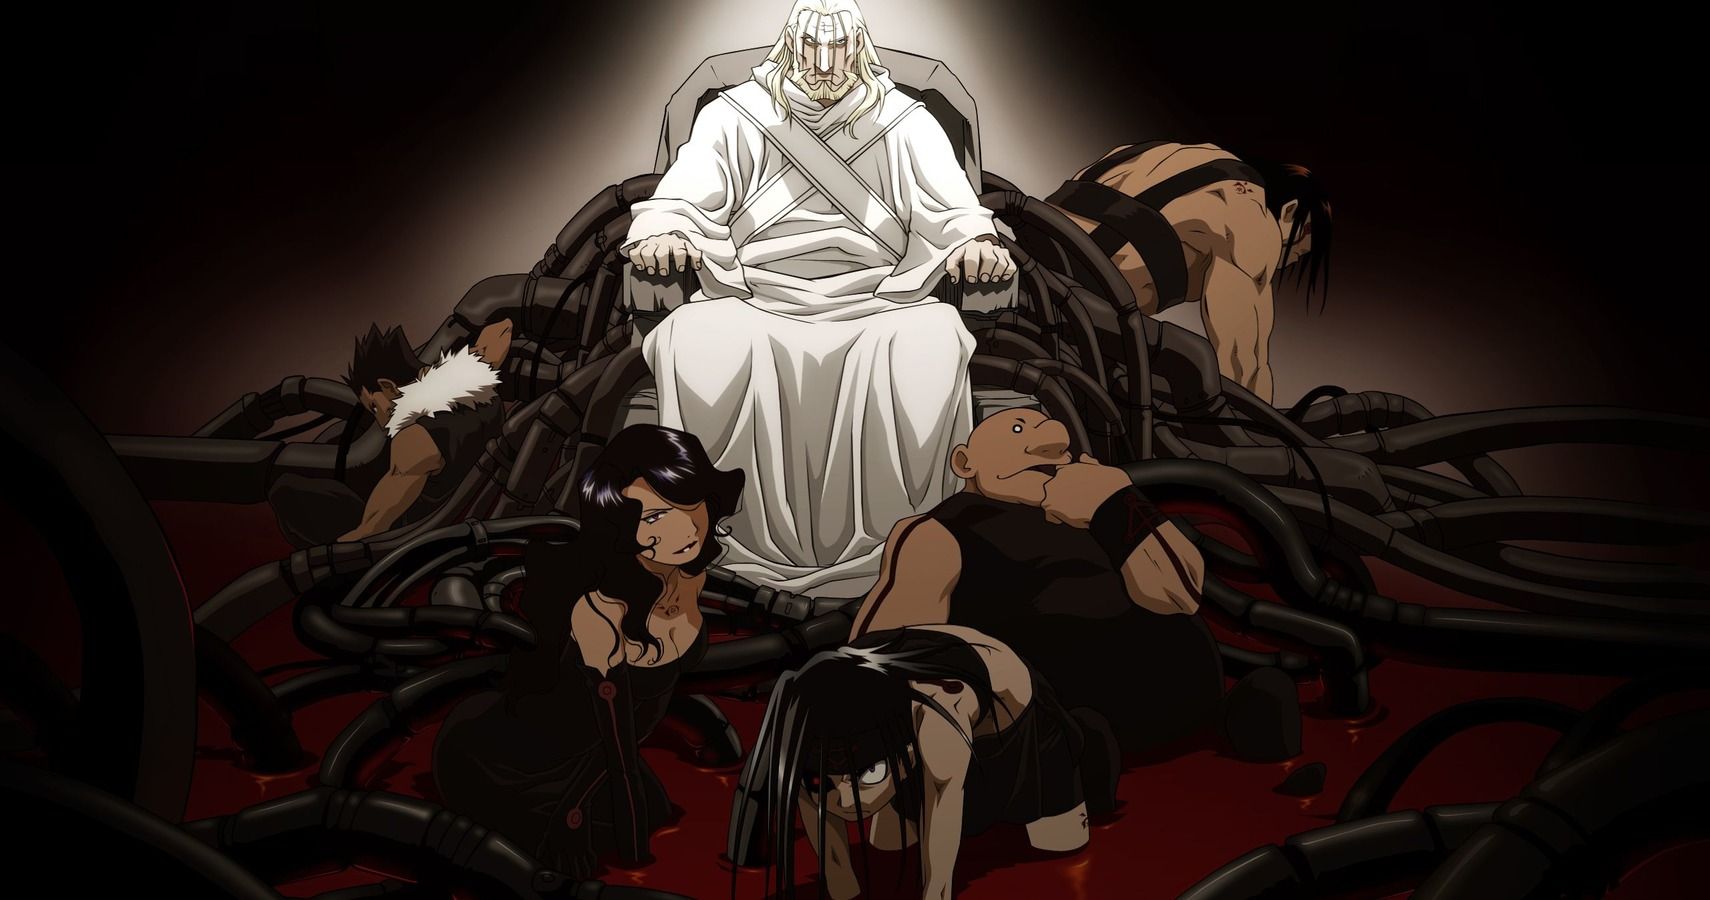 fullmetal alchemist series - What's the difference between Father, Van  Hohenheim, and the main Homunculi? - Anime & Manga Stack Exchange